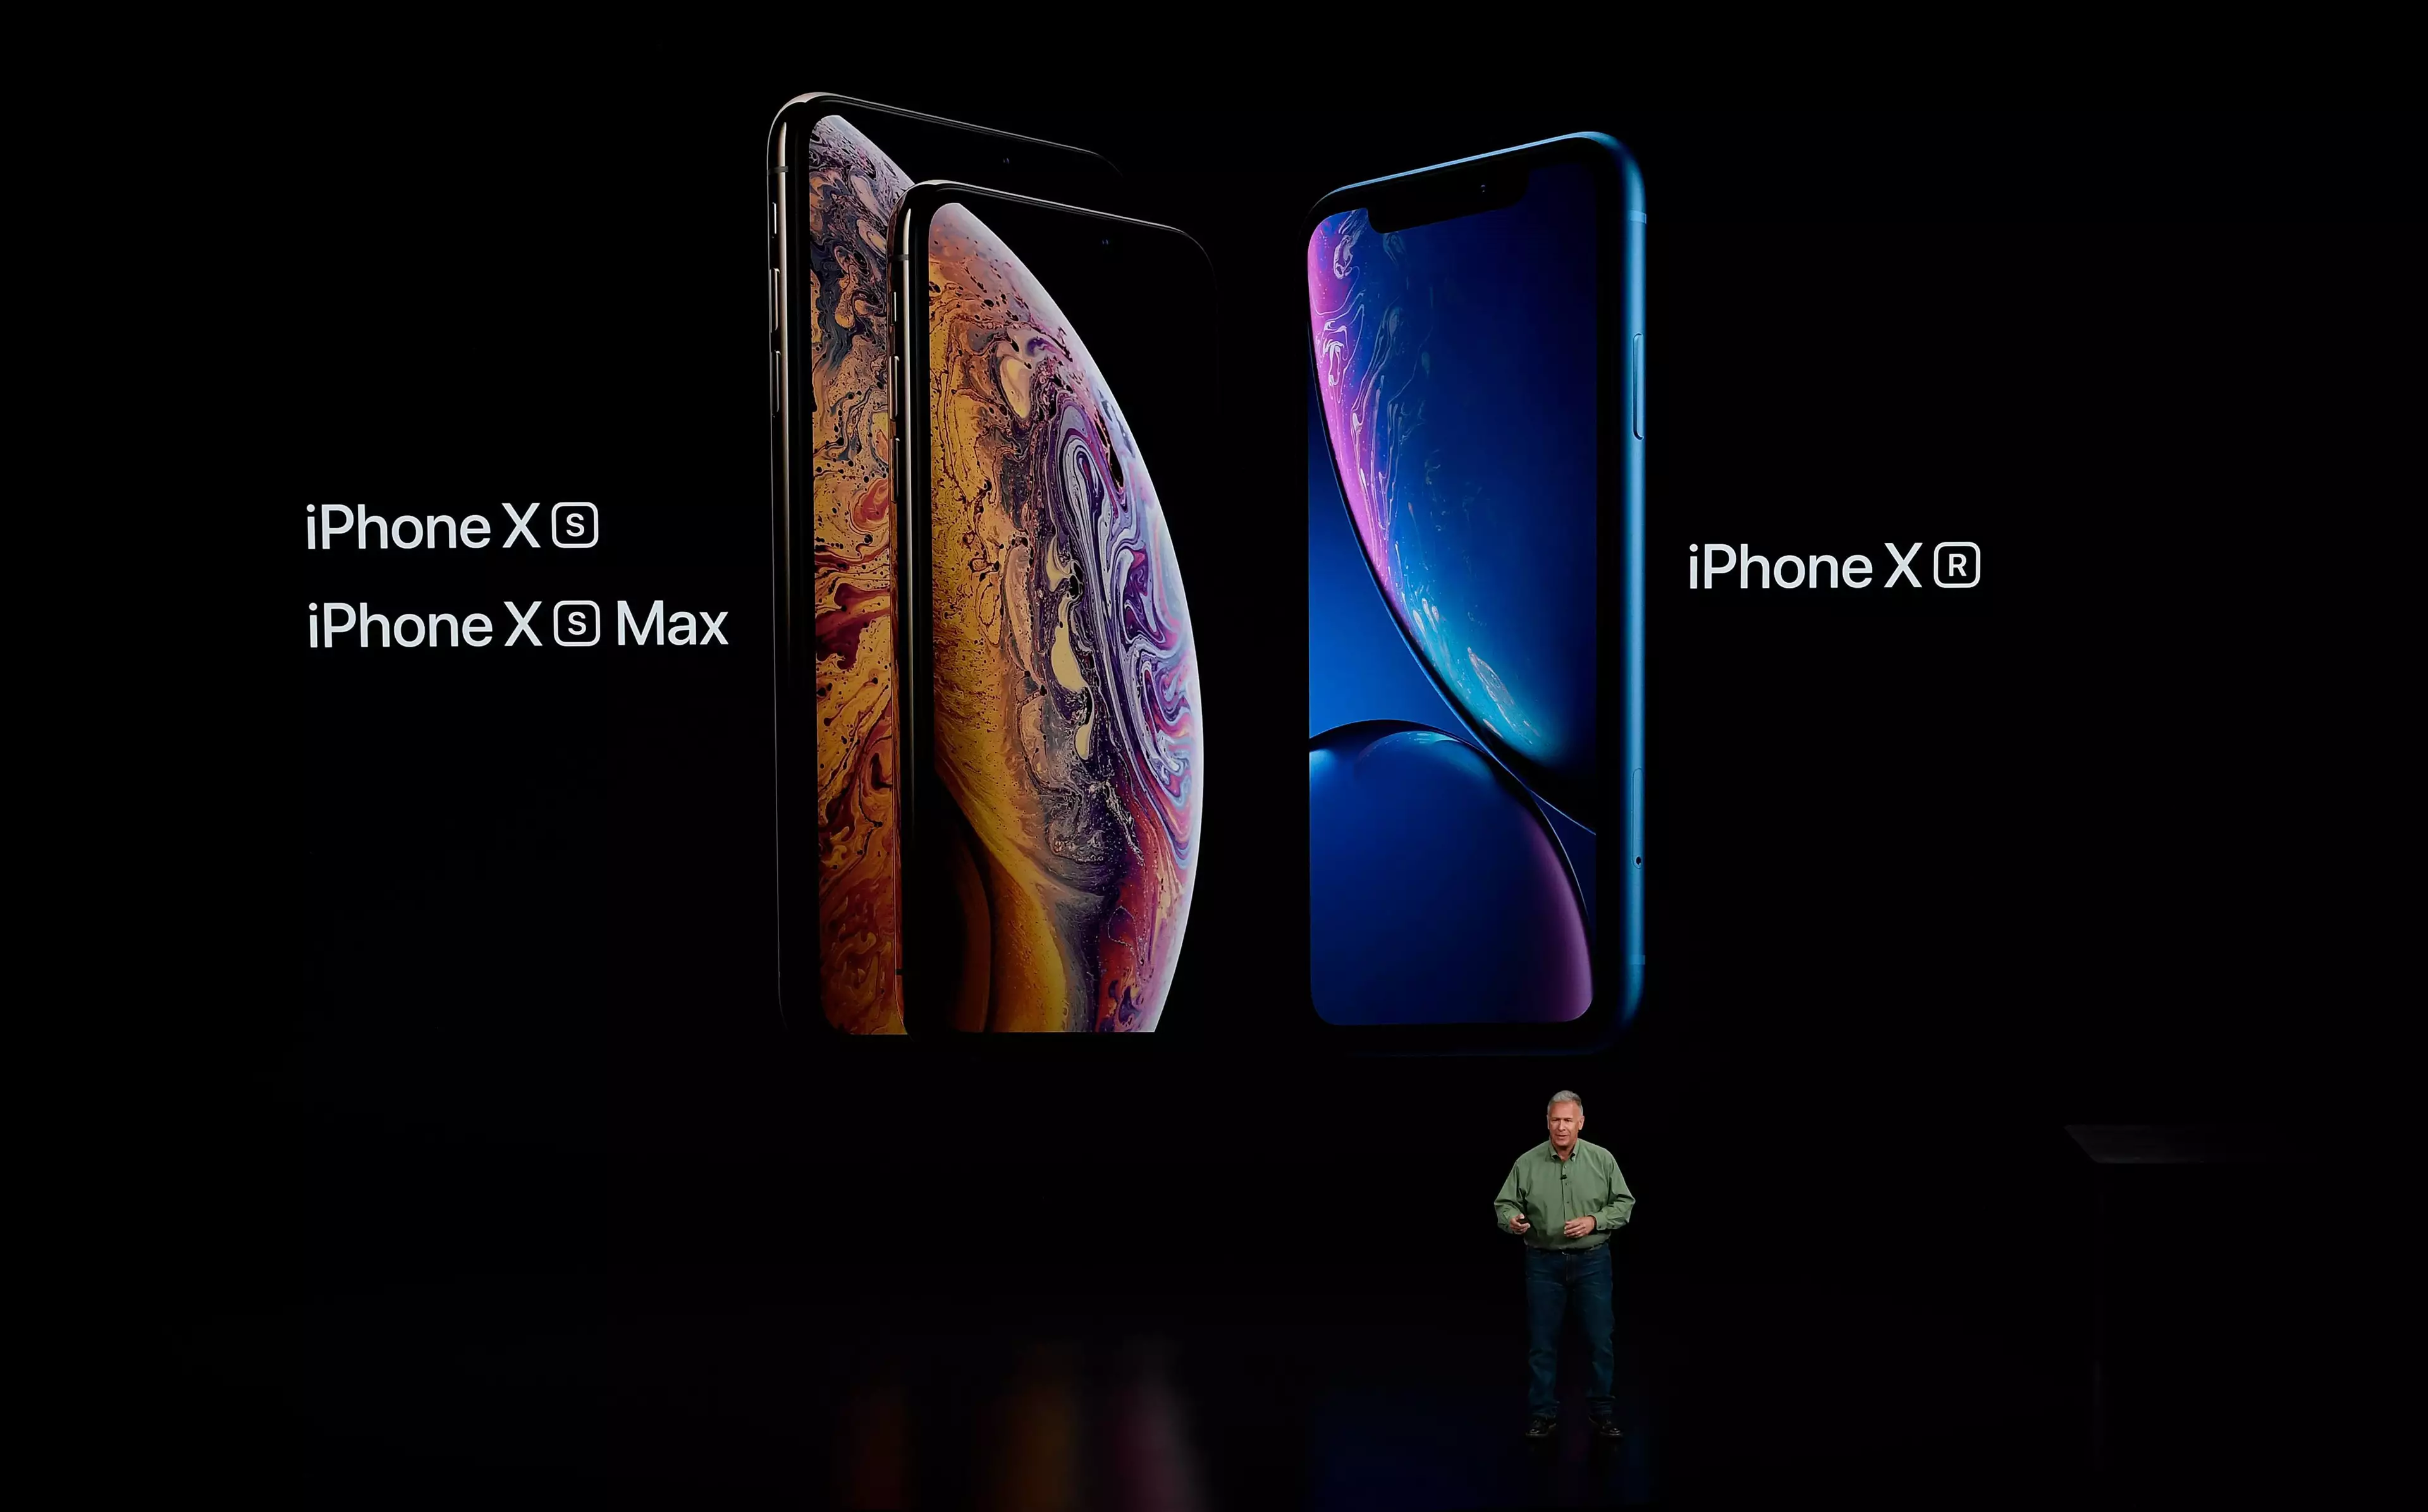 The newly released Apple iPhones at the Steve Jobs Theater in 2018.